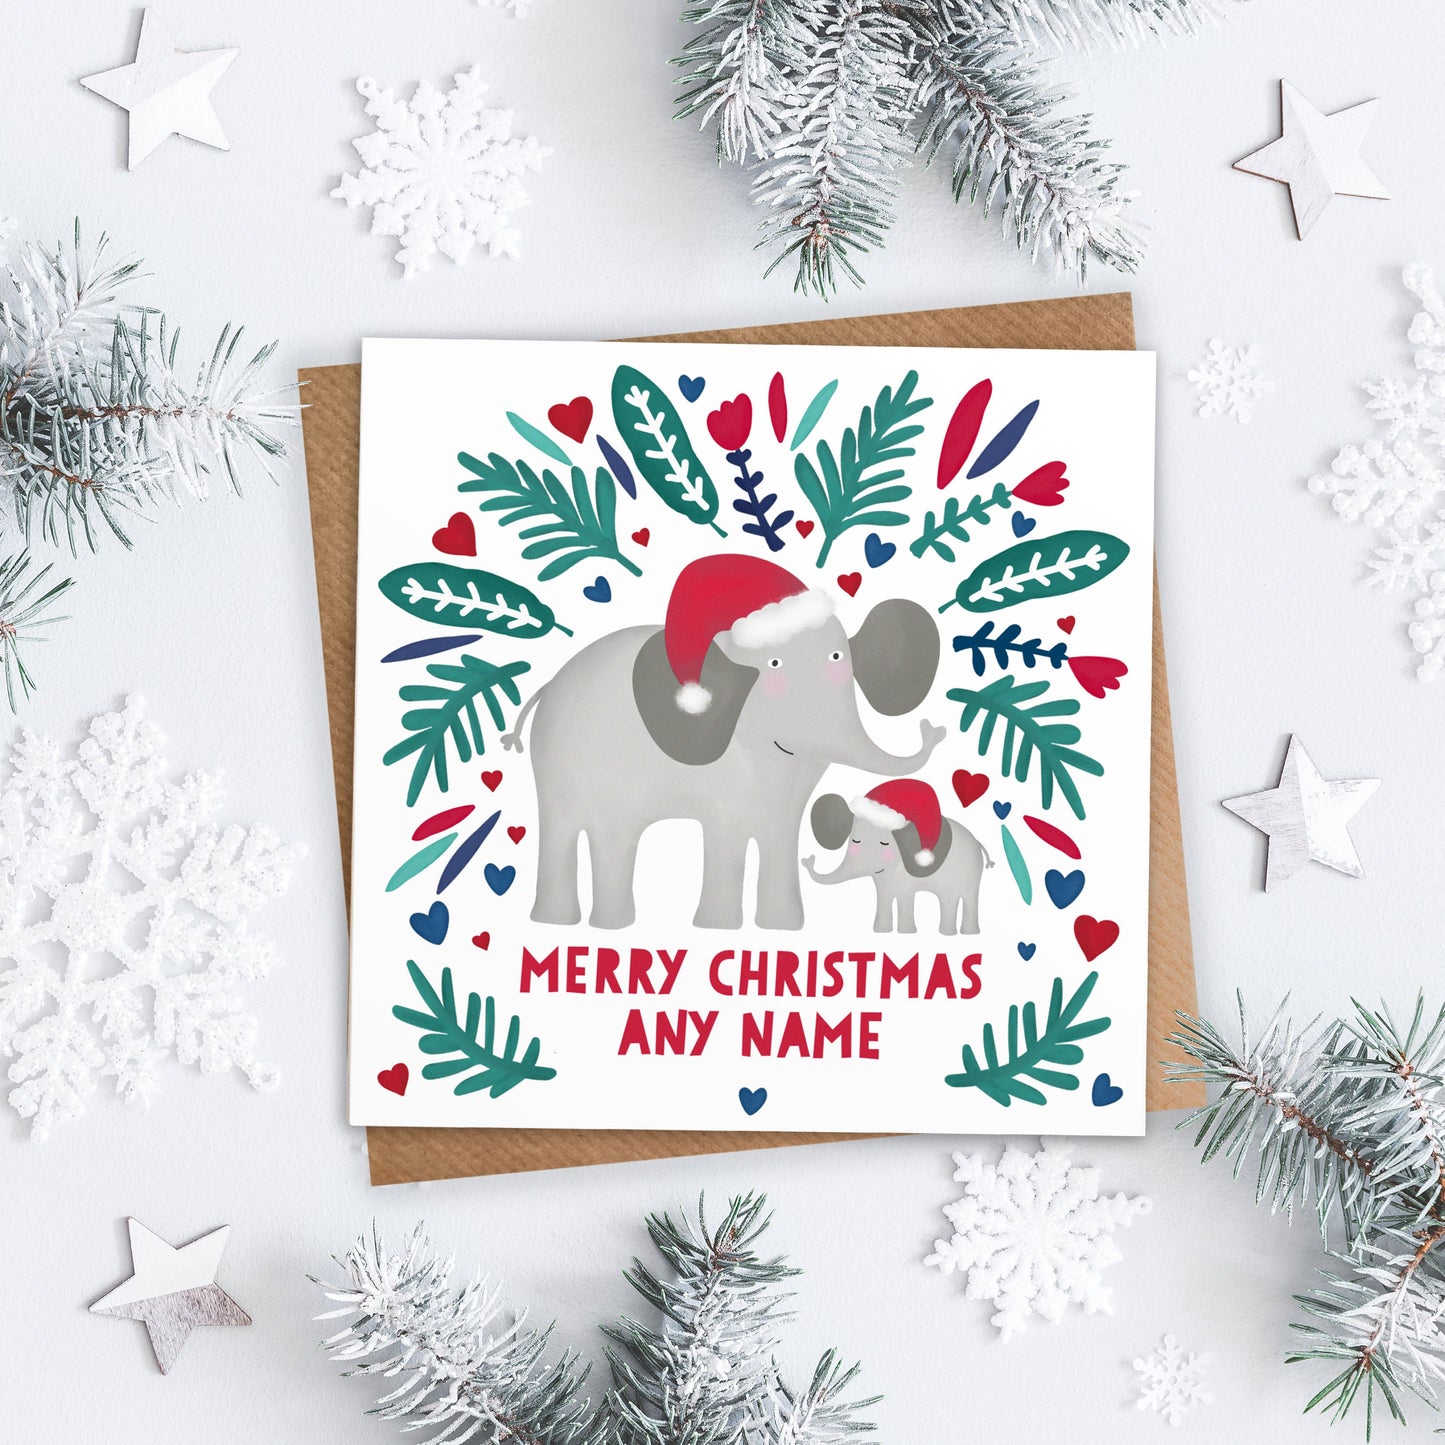 Merry Christmas Cute Elephant Card. Personalise for Daddy, Mummy, Grandpa, Granny etc. Personalised Christmas Card. Send Direct Option.